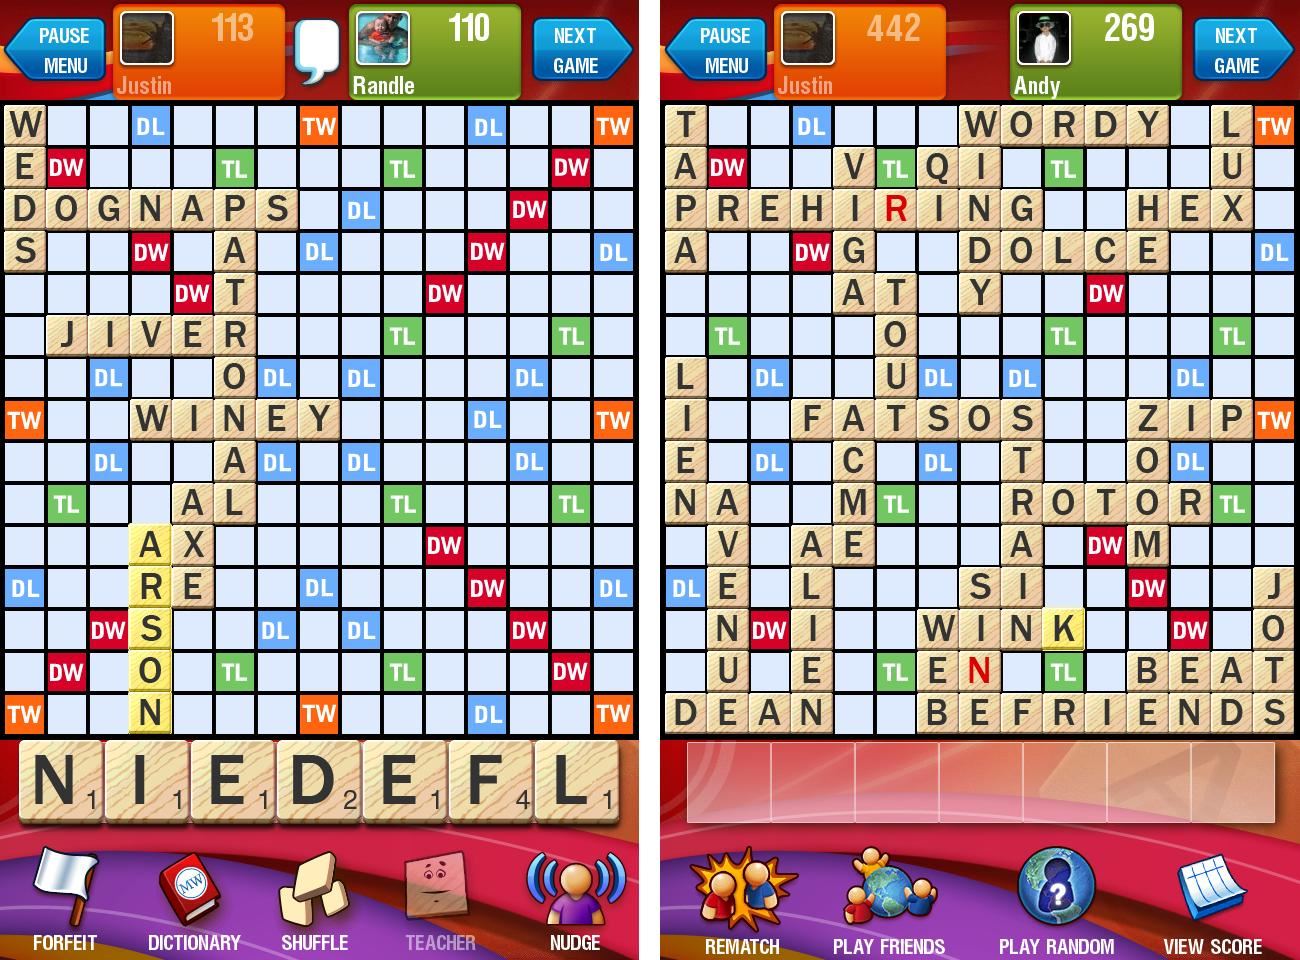 Scrabble Finally Hits Android Devices... But Does It Beat Words with Friends?